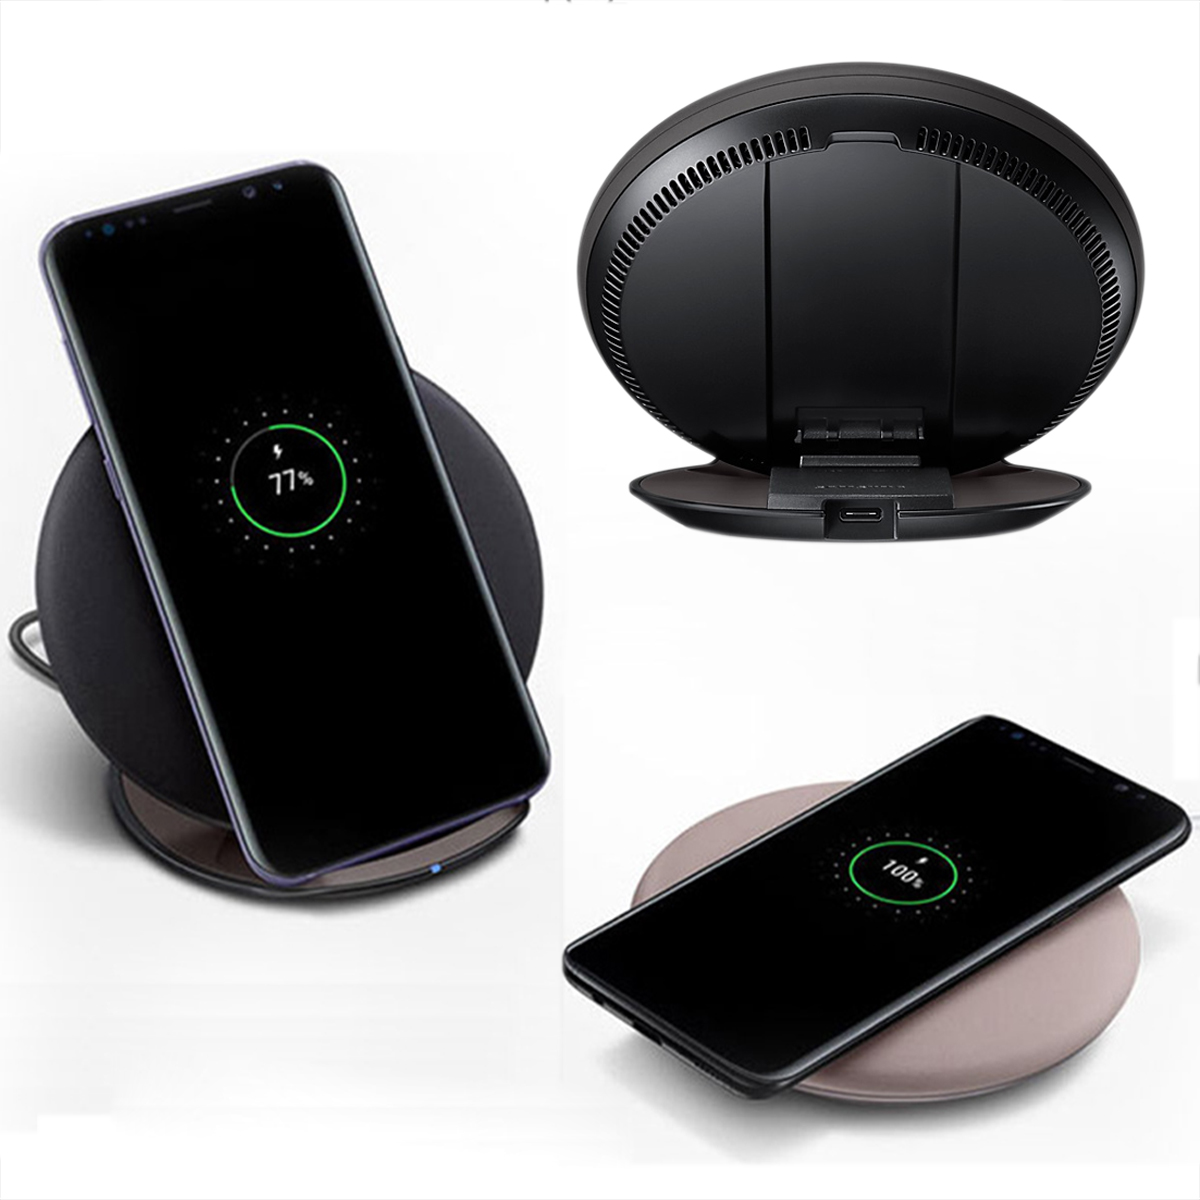 

Fast QI Wireless Charger Charging For Samsung Galaxy Note 5 S6 Edge+ S7 S8 S8+